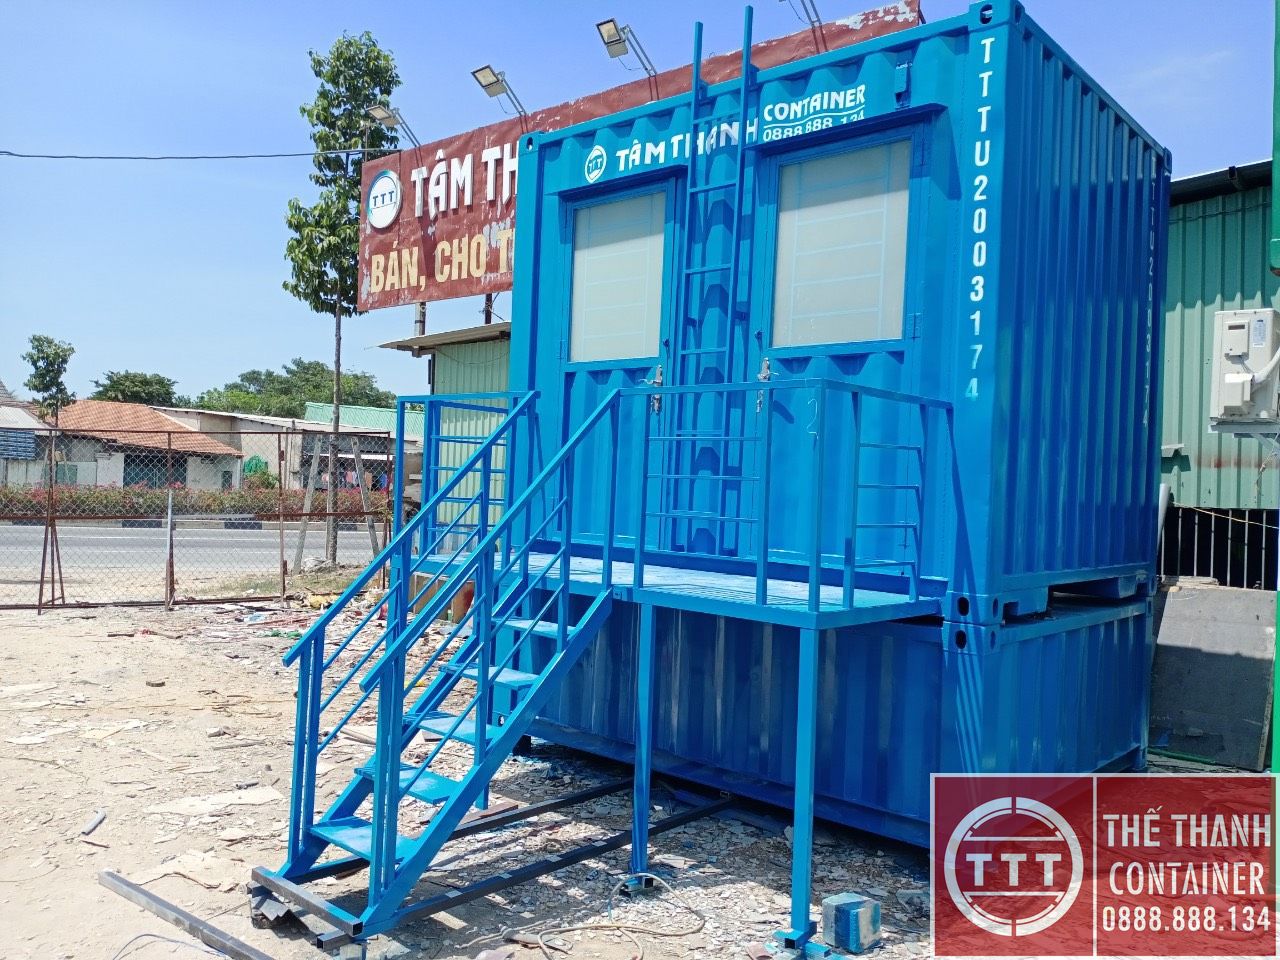 CONTAINER TOILET